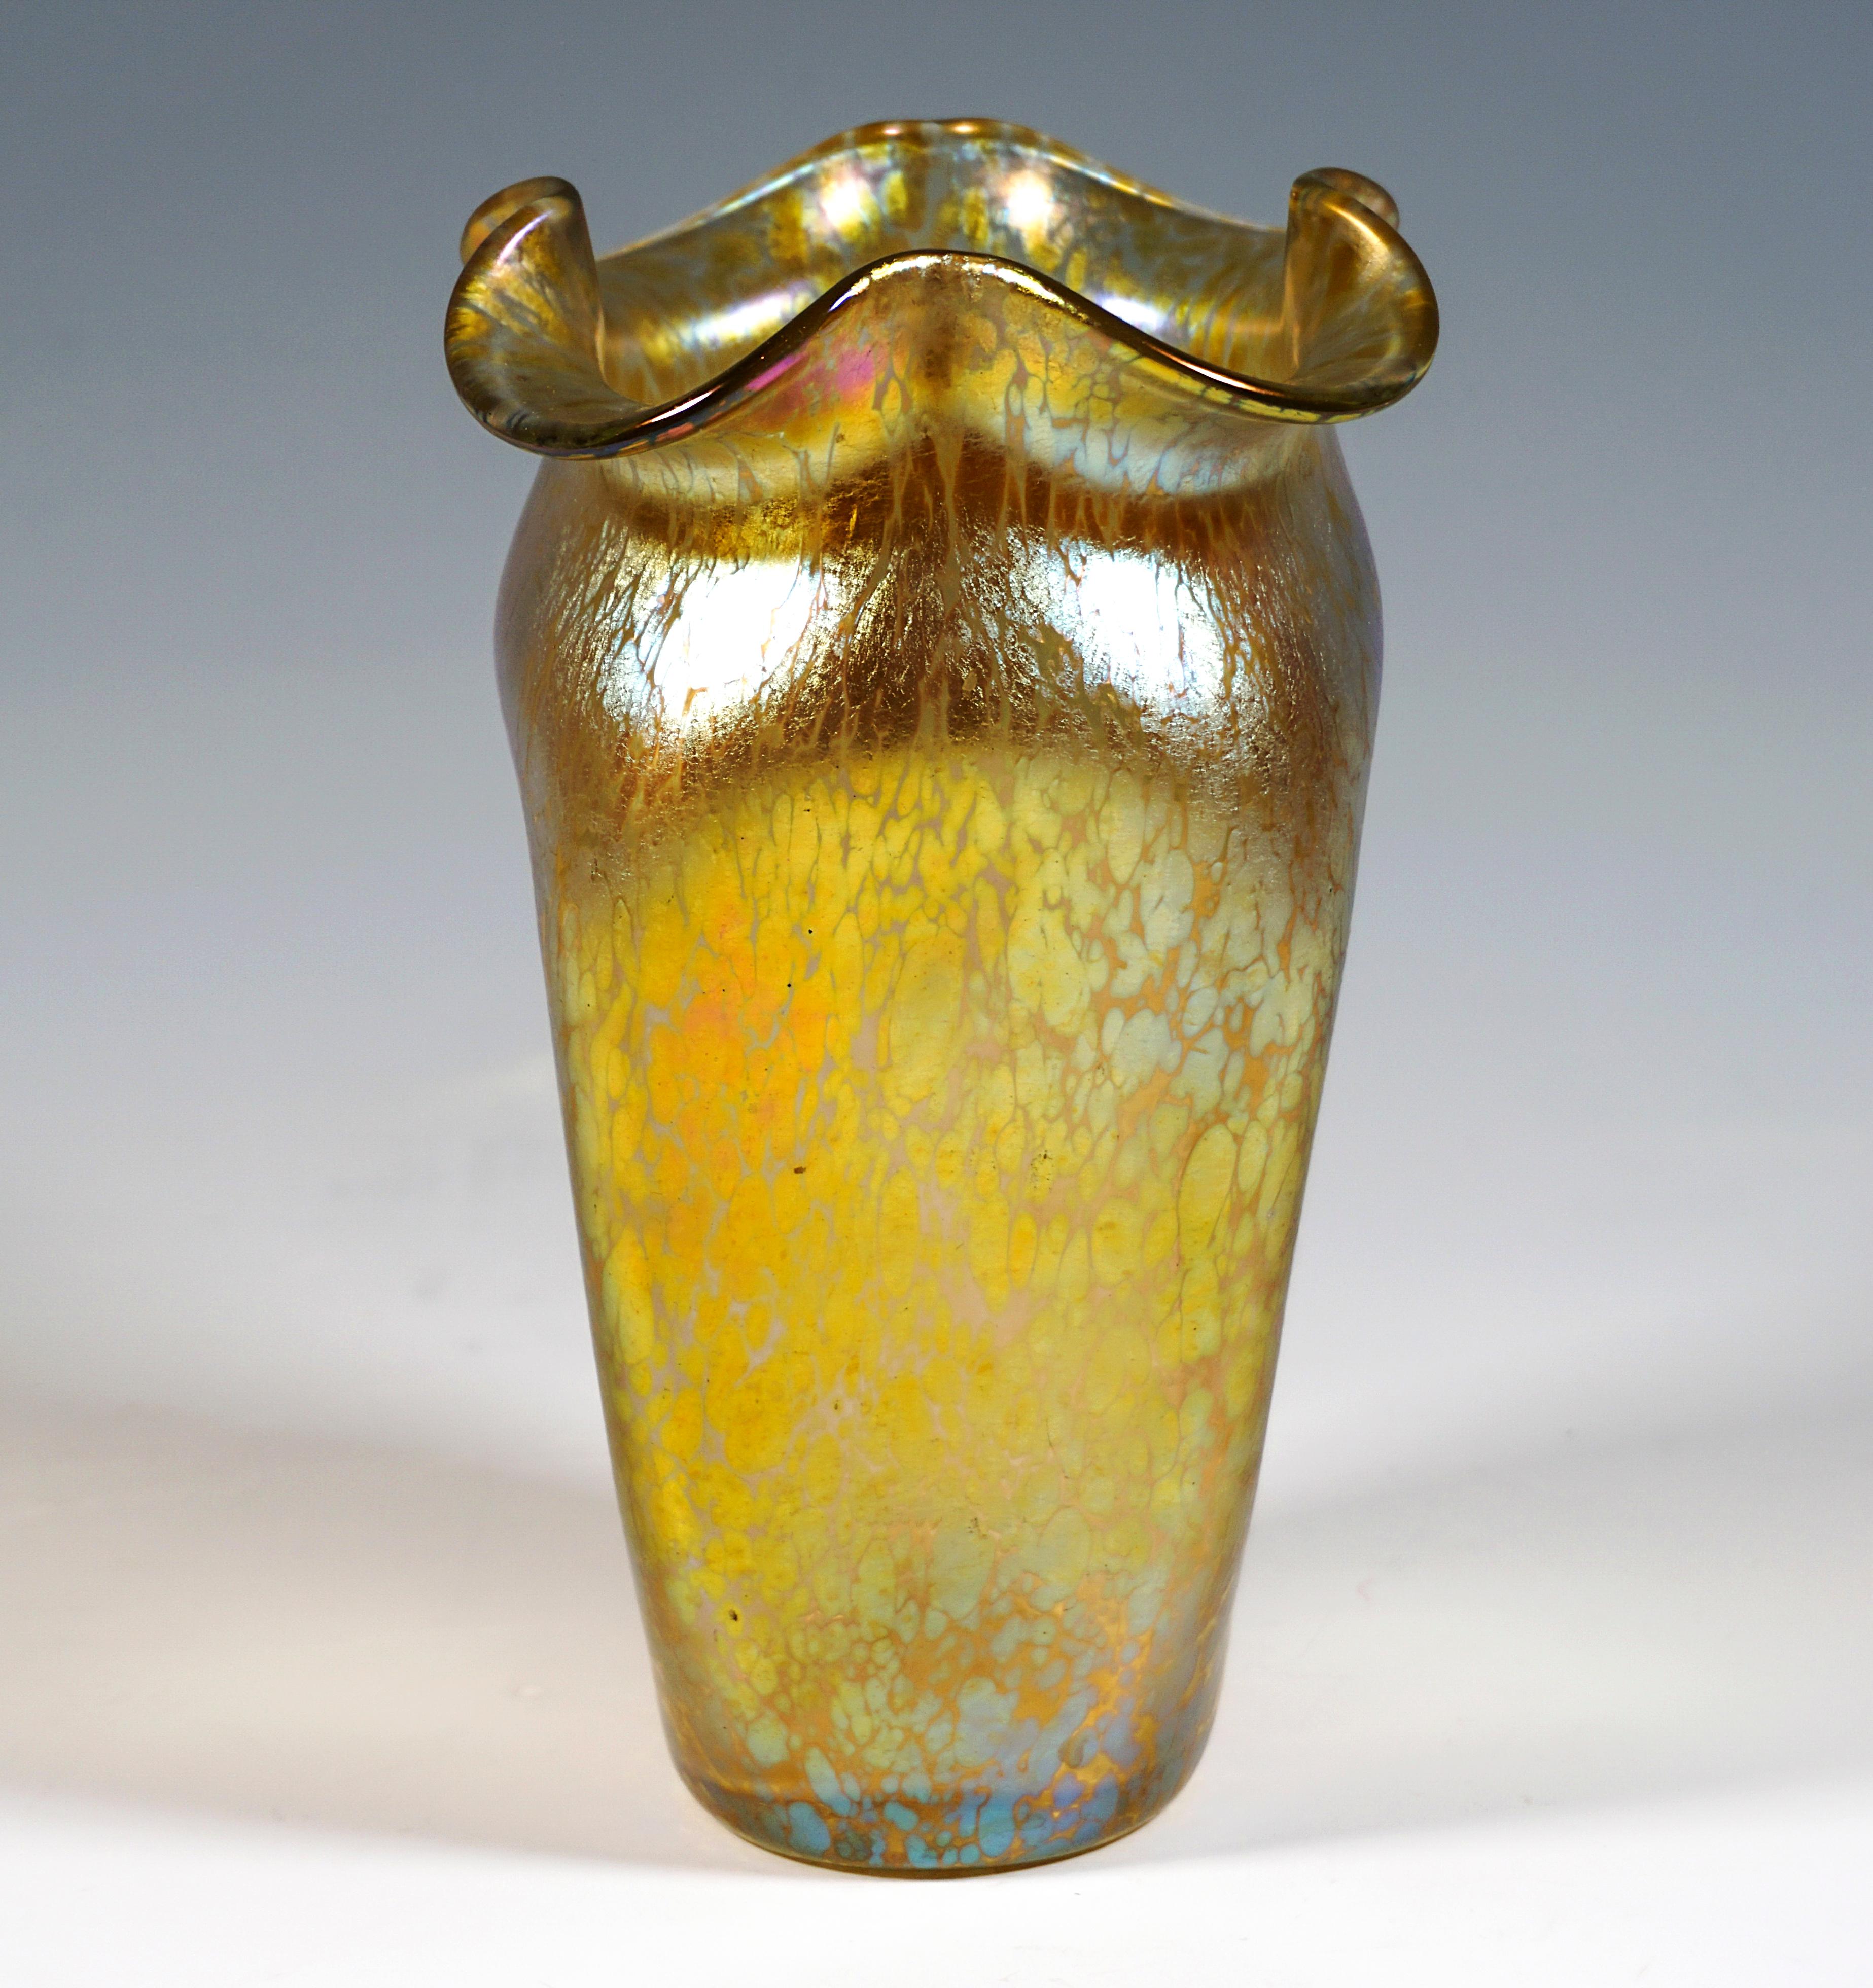 Finest Bohemian Art Nouveau Glass Vase:
Mould blown glass on flush stand, bulbous raised body fourfold extensively impressed, with short wide neck, lip rim formed into quatrefoil, cut out and spherical polished tear-off on bottom.

Shape: Series I,